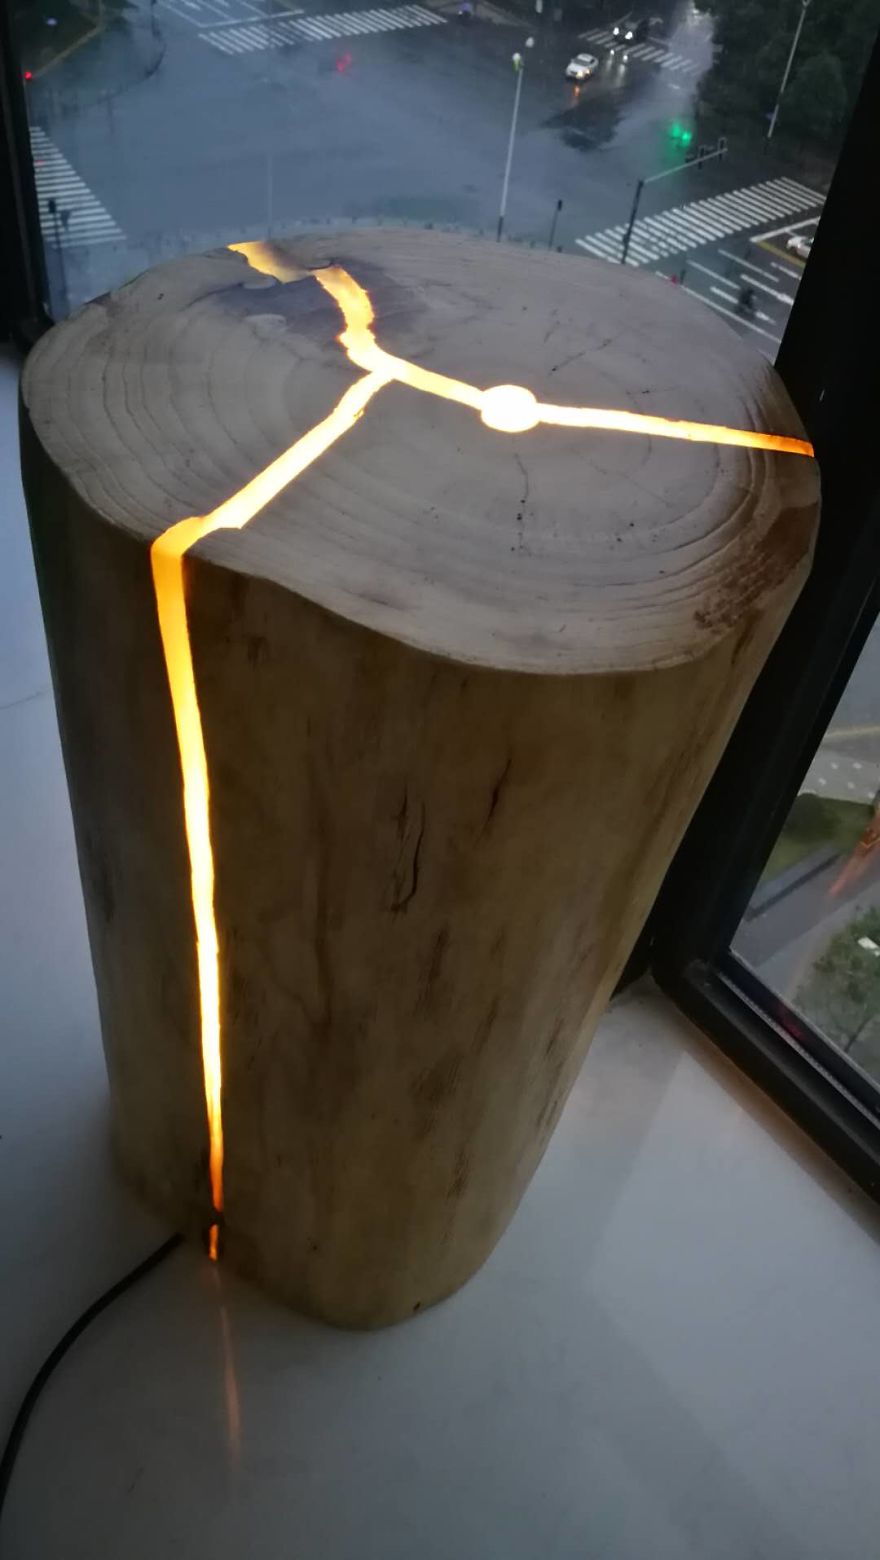 Crack Stump Lamps Made From Solid Wood And Epoxy Resin Flowing Warm Light By Sinobrilla